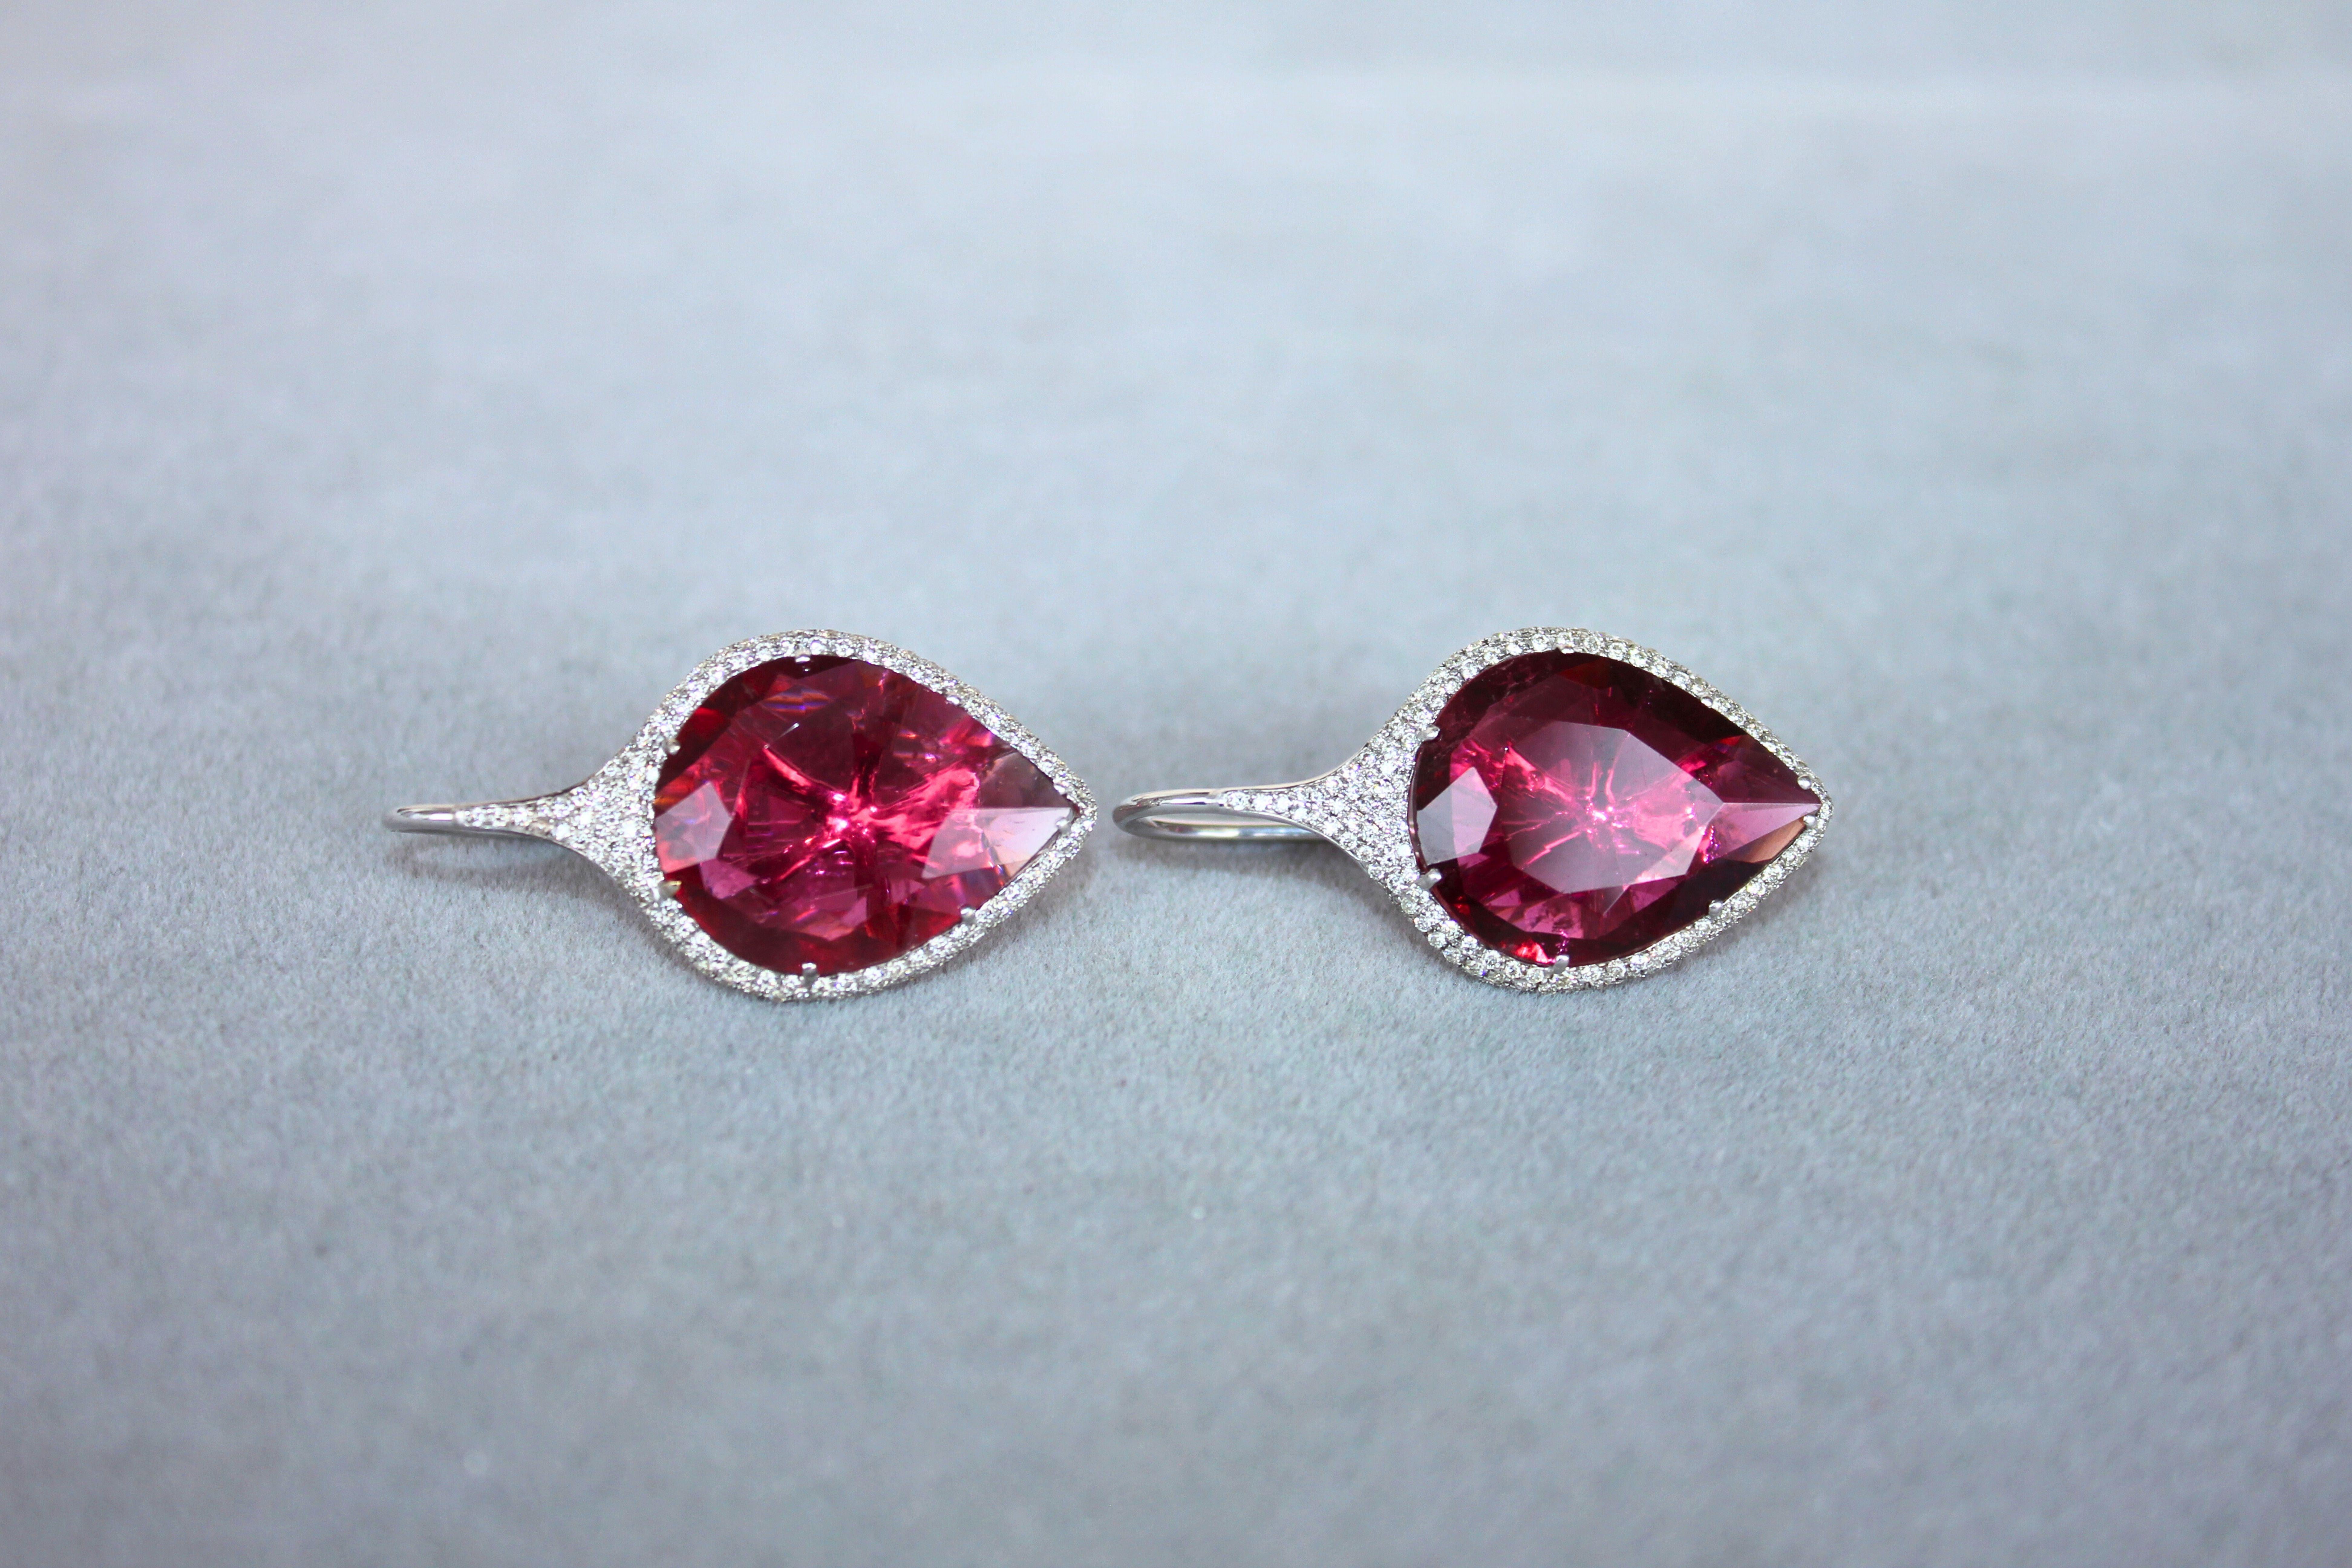 Fancy Pear Tear Drop Pink Red Rubellite Diamond Pave 18K White Gold Earrings In New Condition For Sale In Fairfax, VA